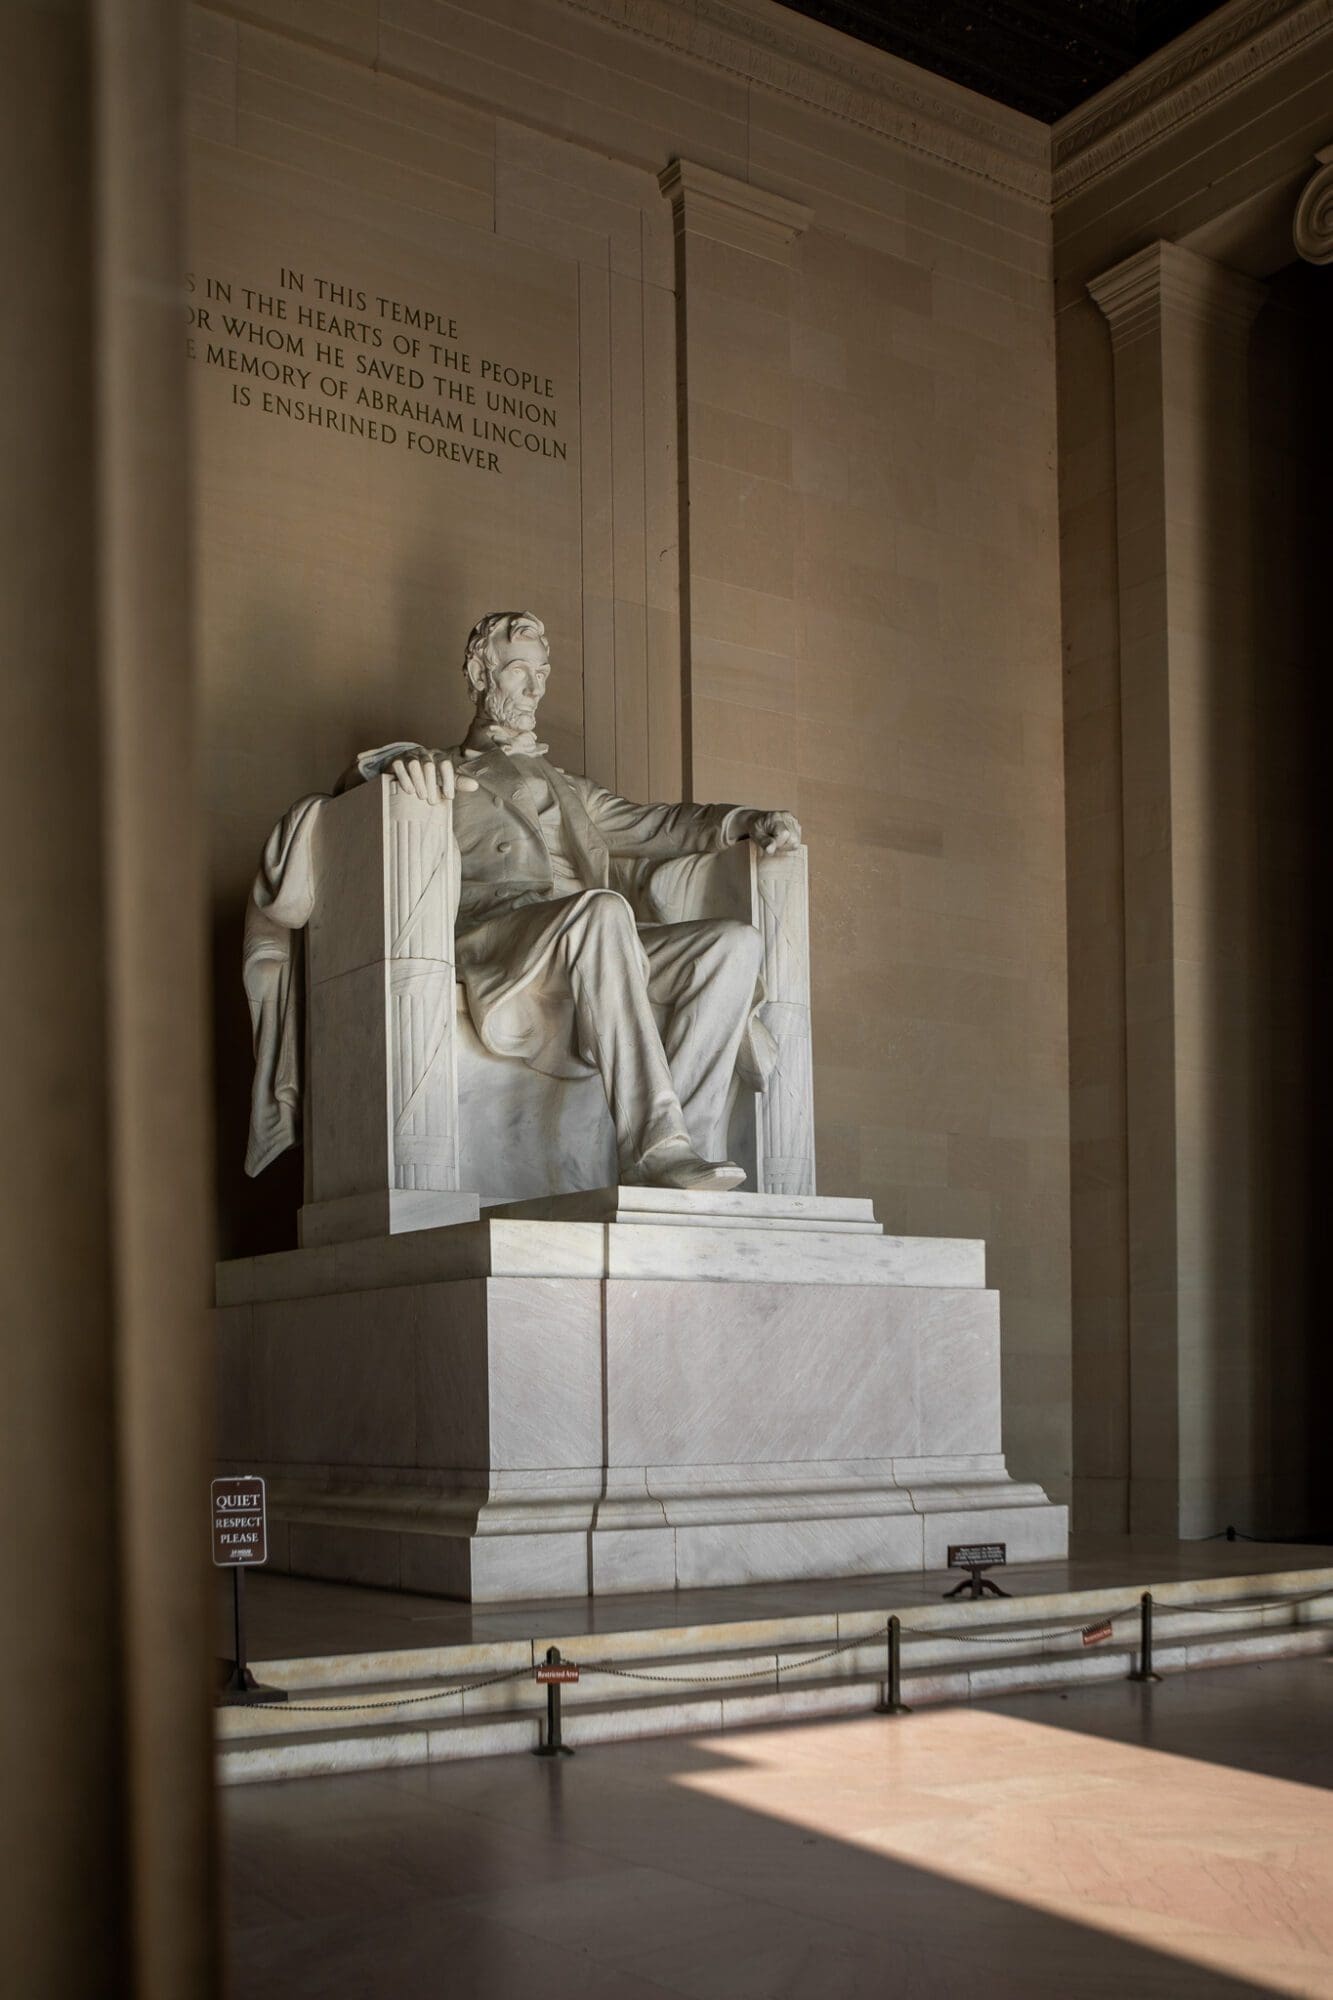 Lincoln Memorial Washington DC Travel Guide Things to Do Sightseeing